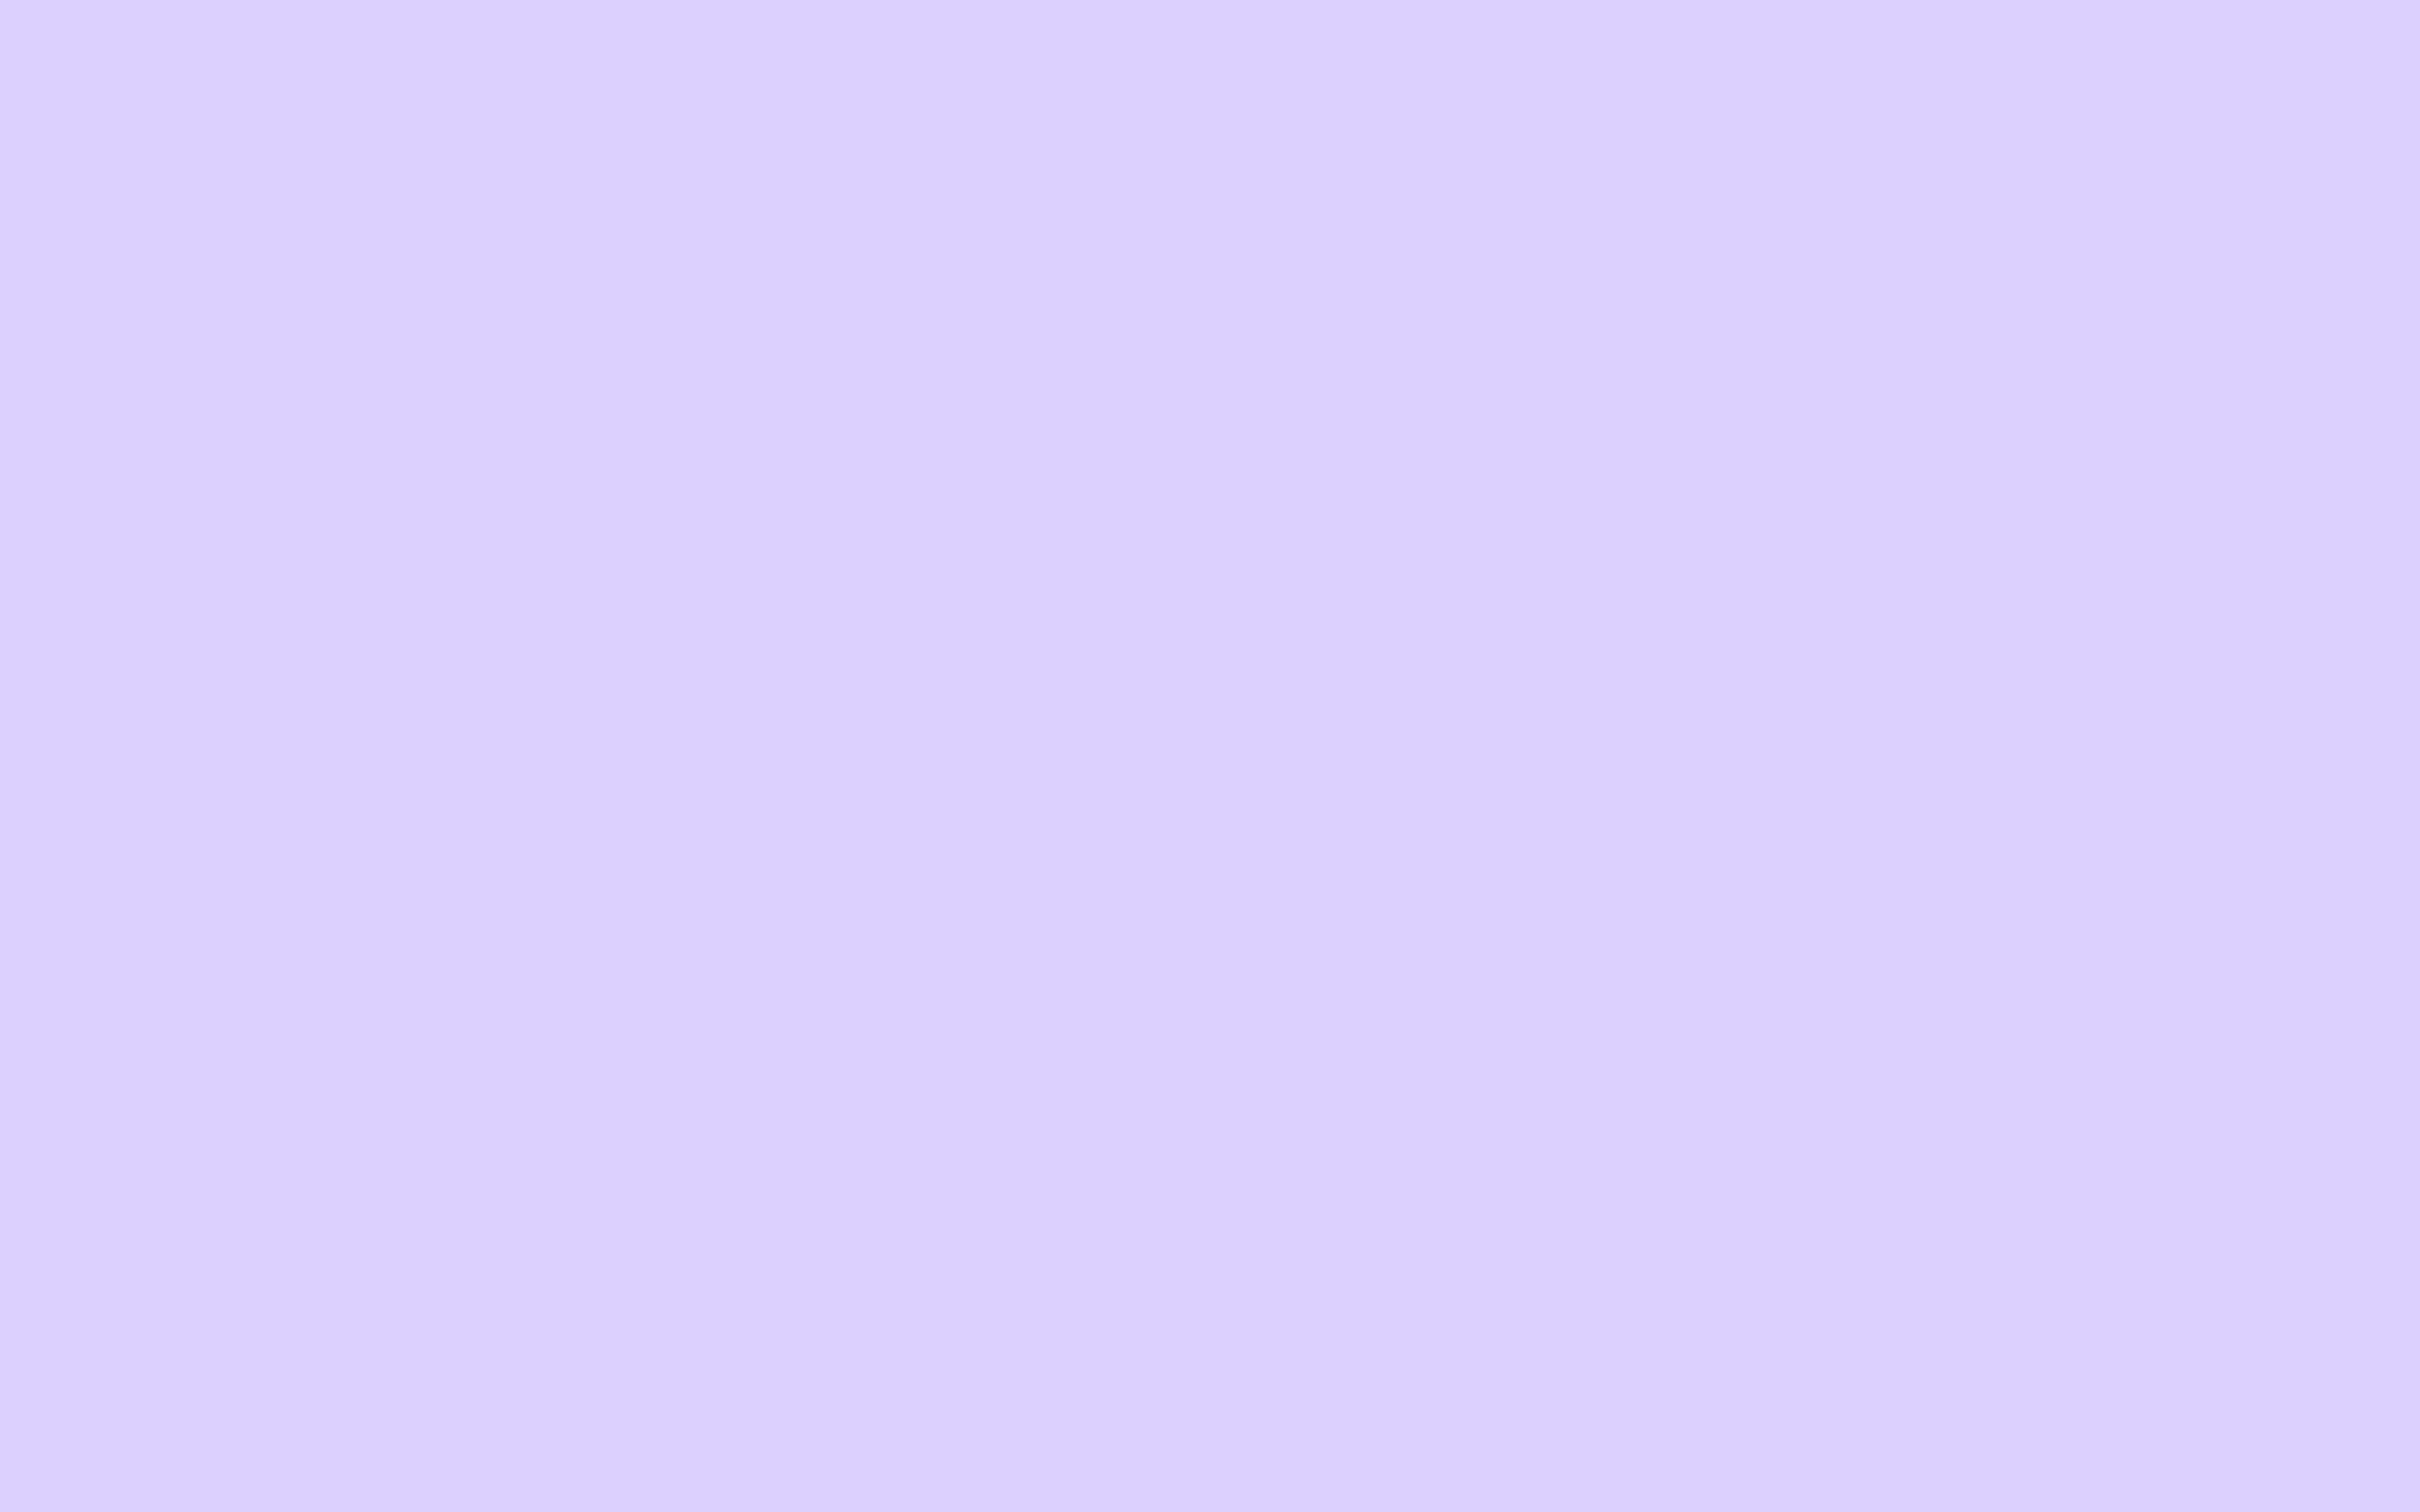 Free 2560x1600 resolution Pale Lavender solid color background view